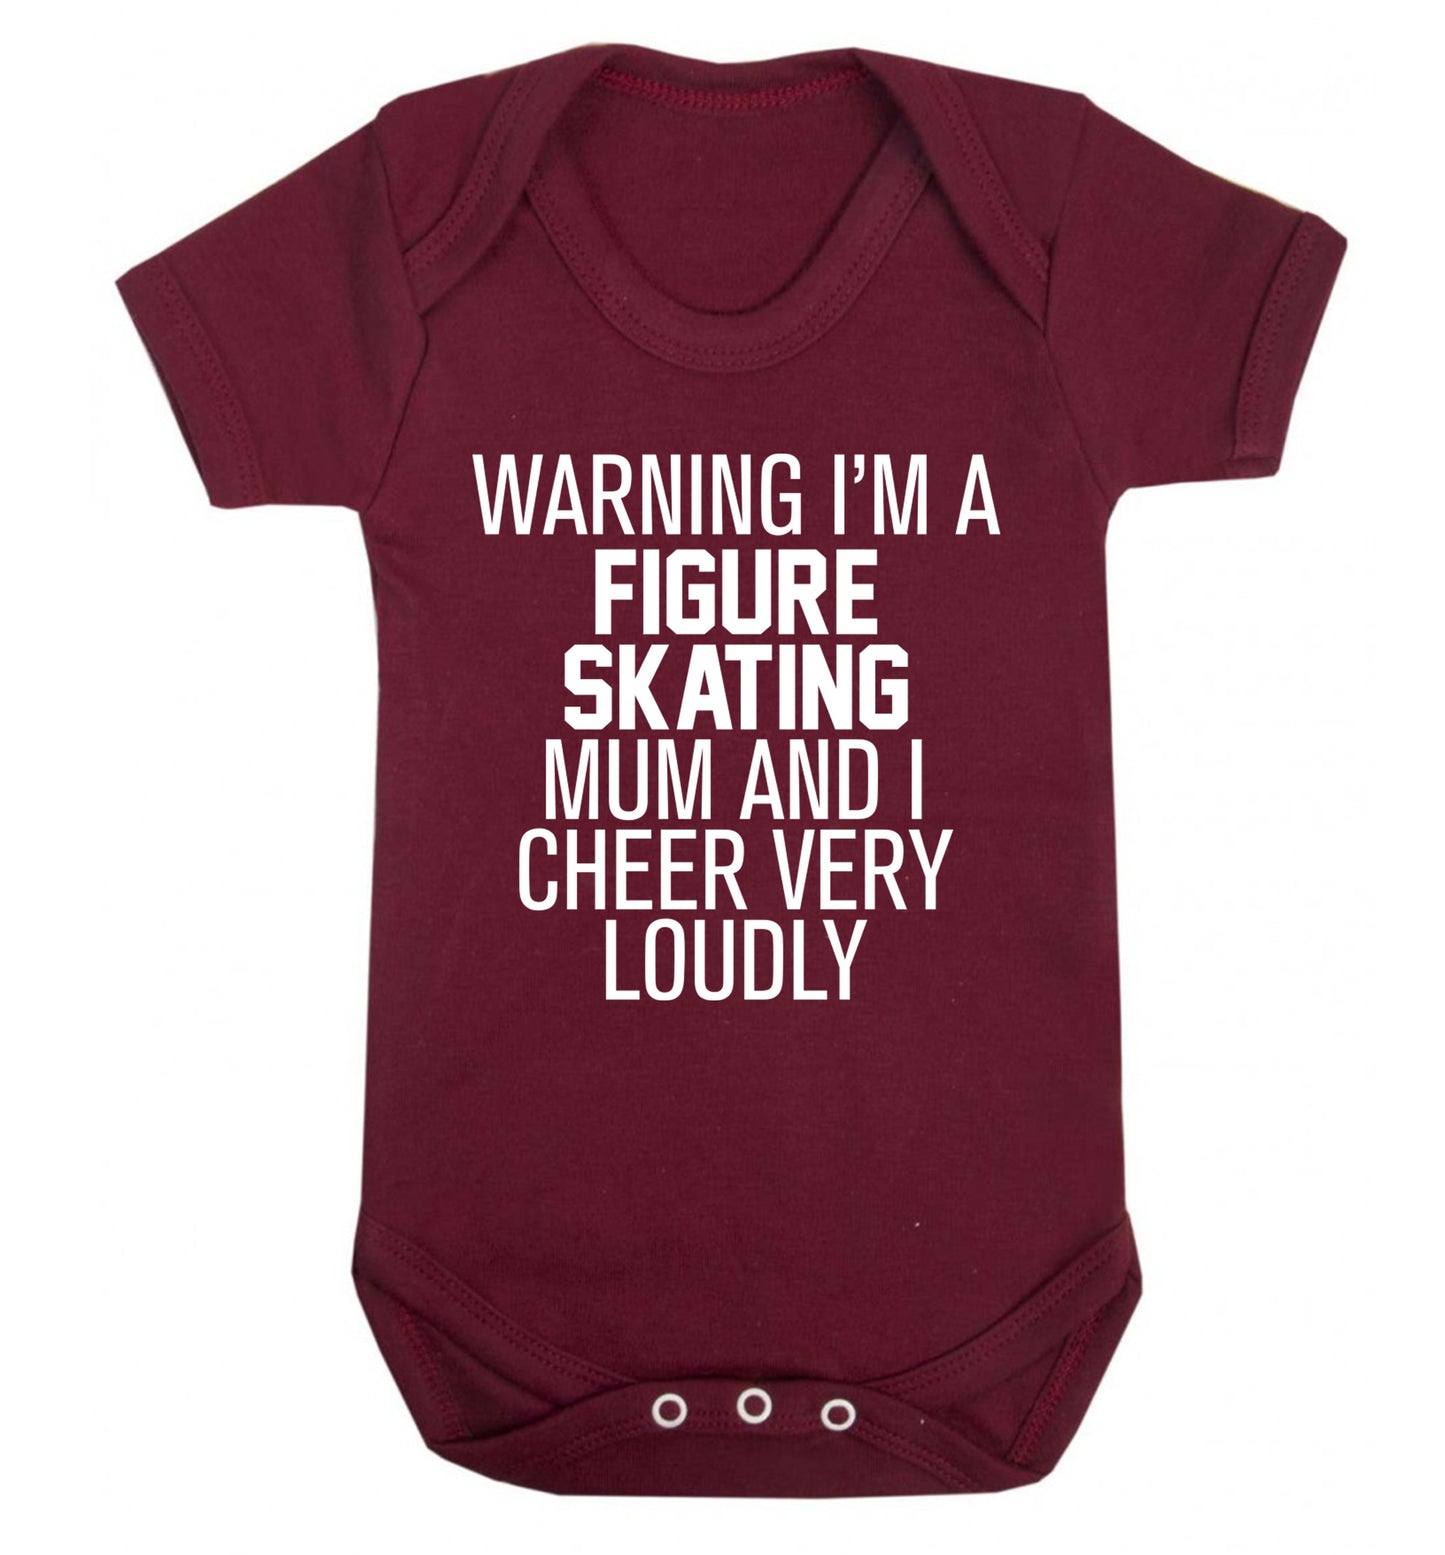 Warning I'm a figure skating mum and I cheer very loudly Baby Vest maroon 18-24 months